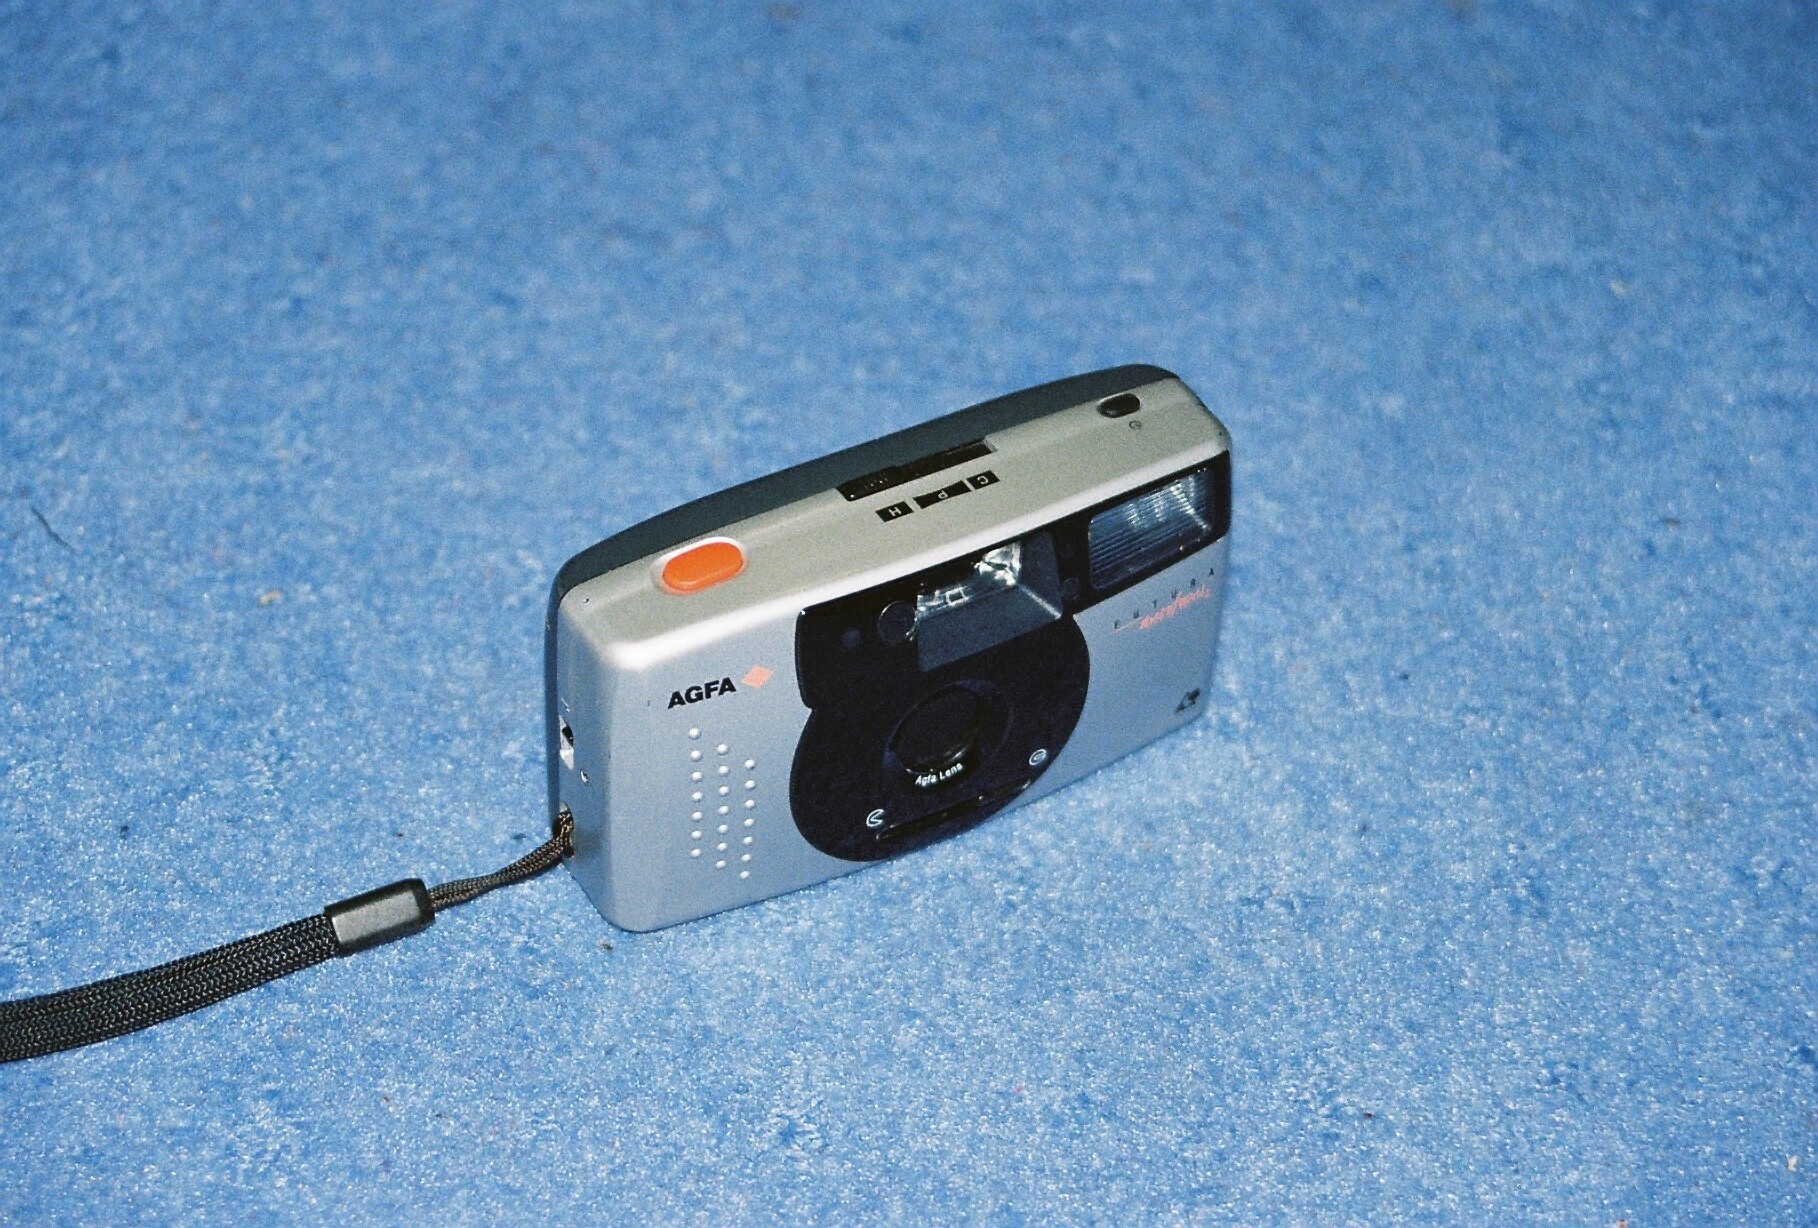 a camera sitting on a blue surface with an orange flash light attached